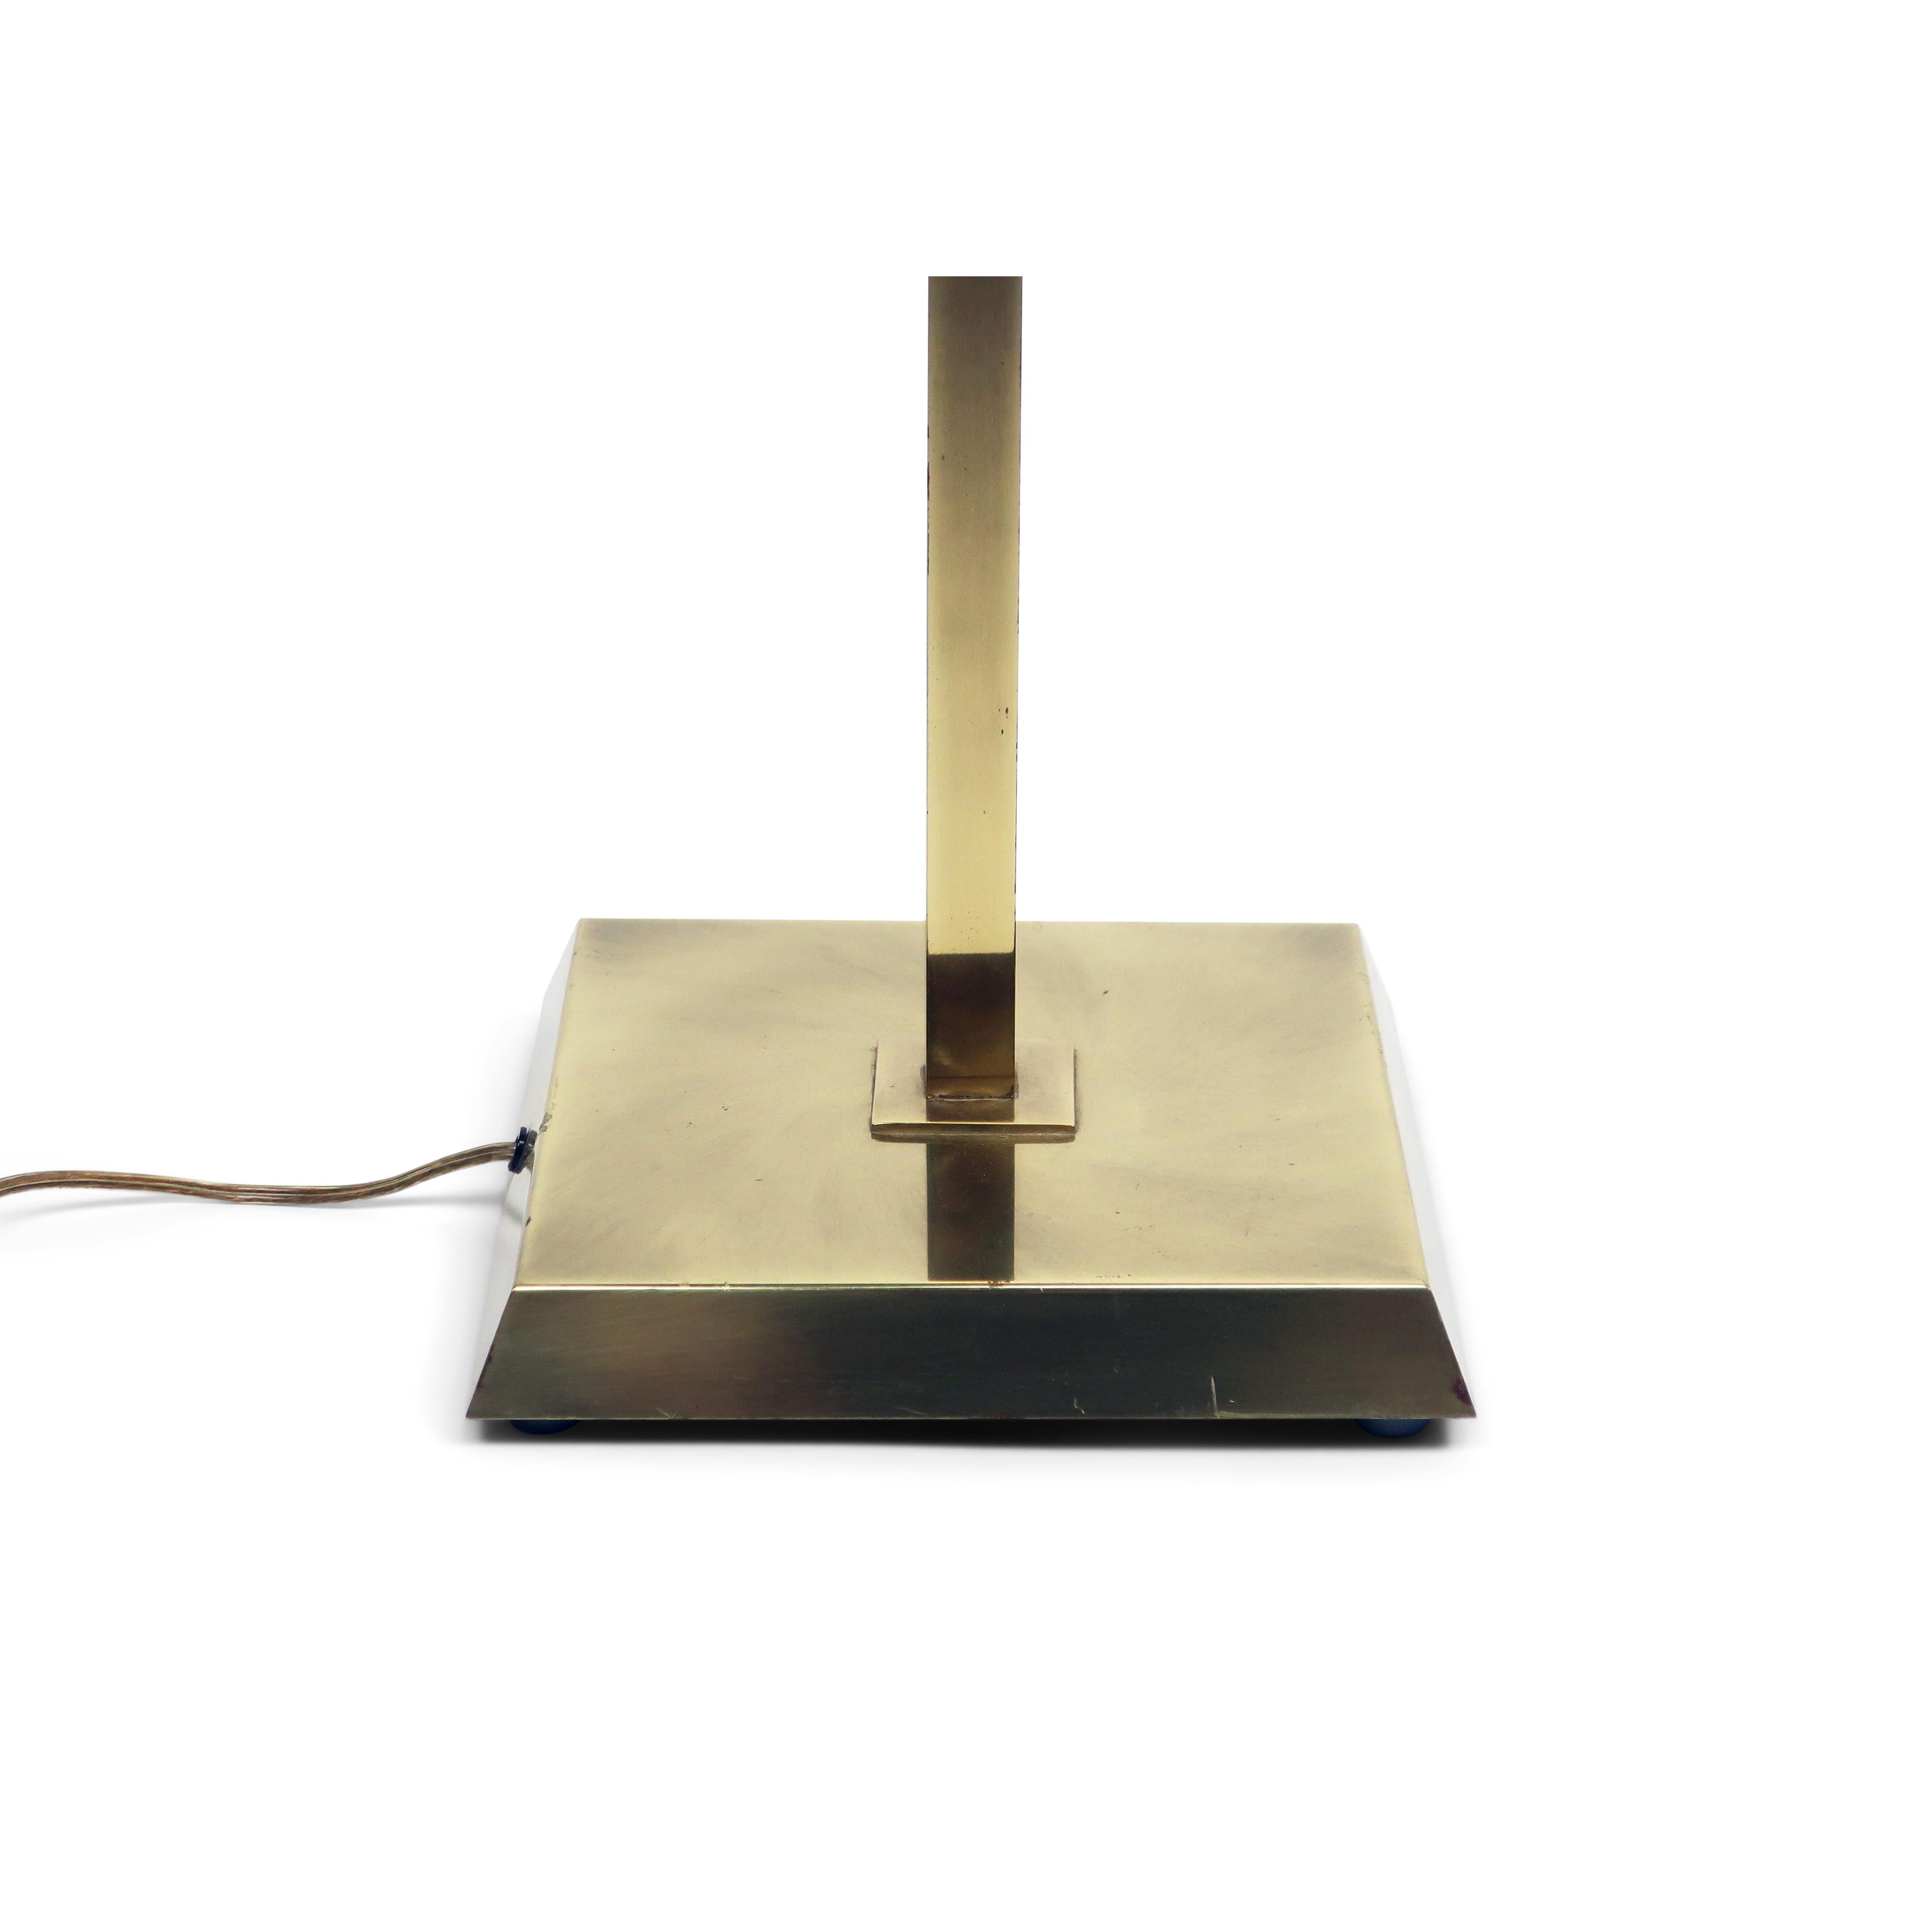 1980s Italian Brass Torchiere Floor Lamp In Good Condition For Sale In Brooklyn, NY